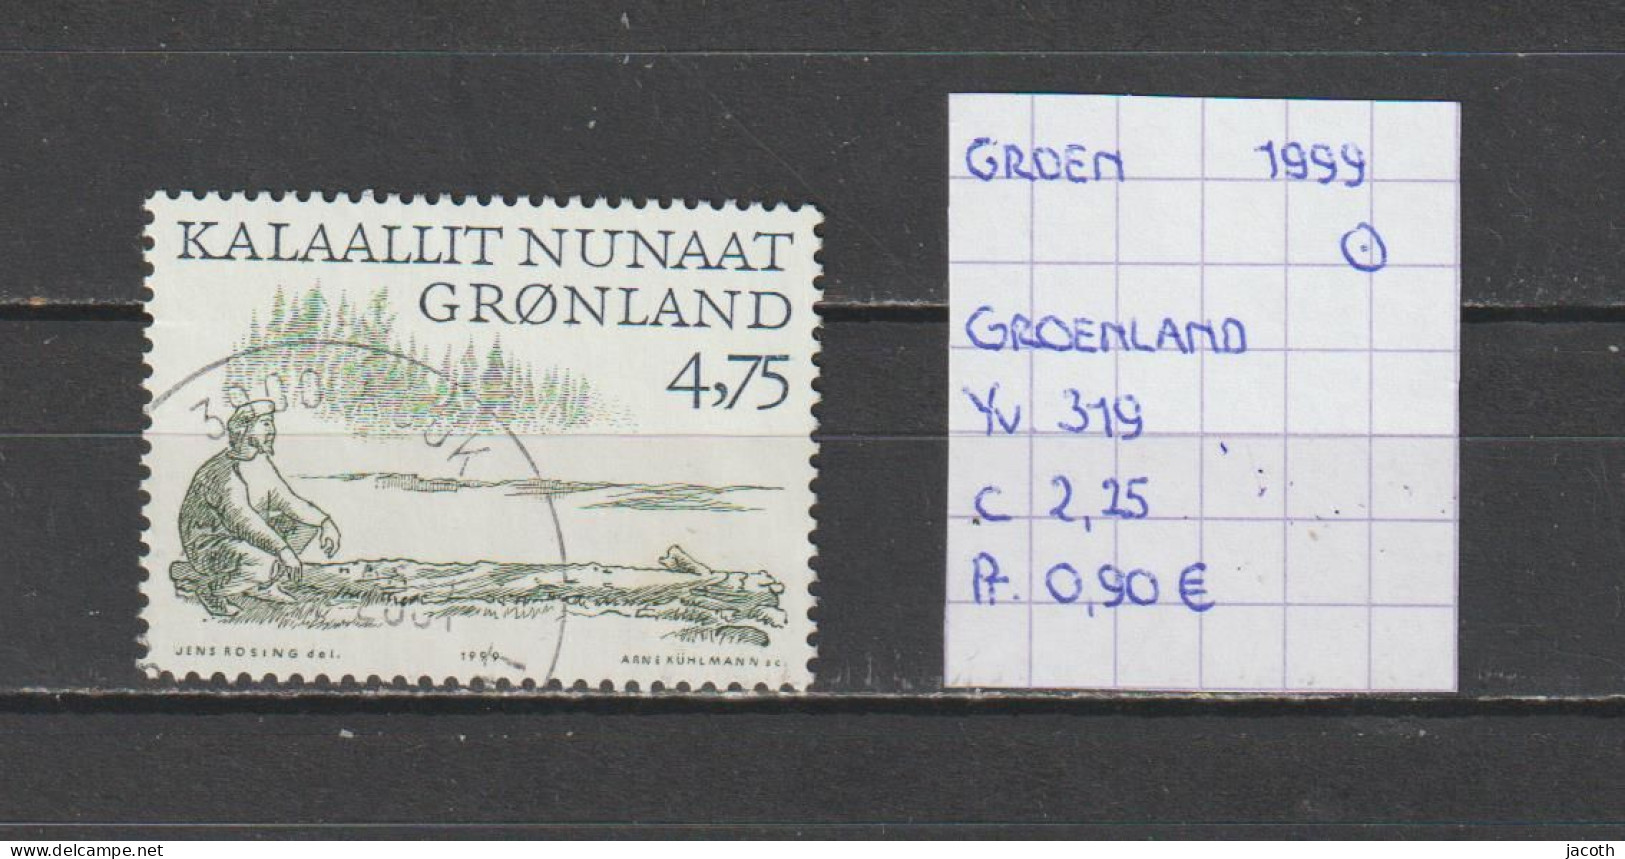 (TJ) Groenland 1999 - YT 319 (gest./obl./used) - Used Stamps